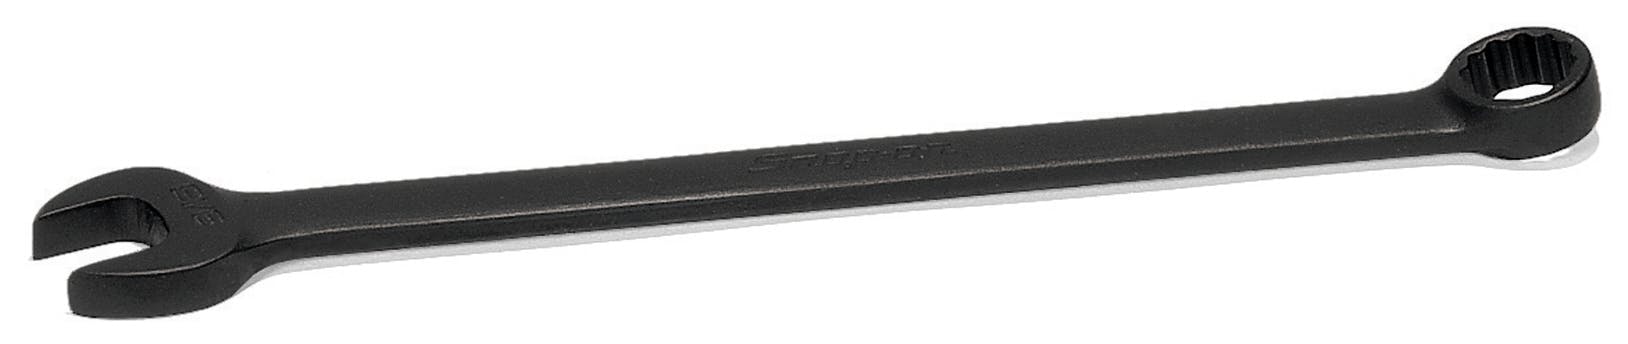 Snap On Combination Wrench GOEXM220B Black Oxide Industrial Finish